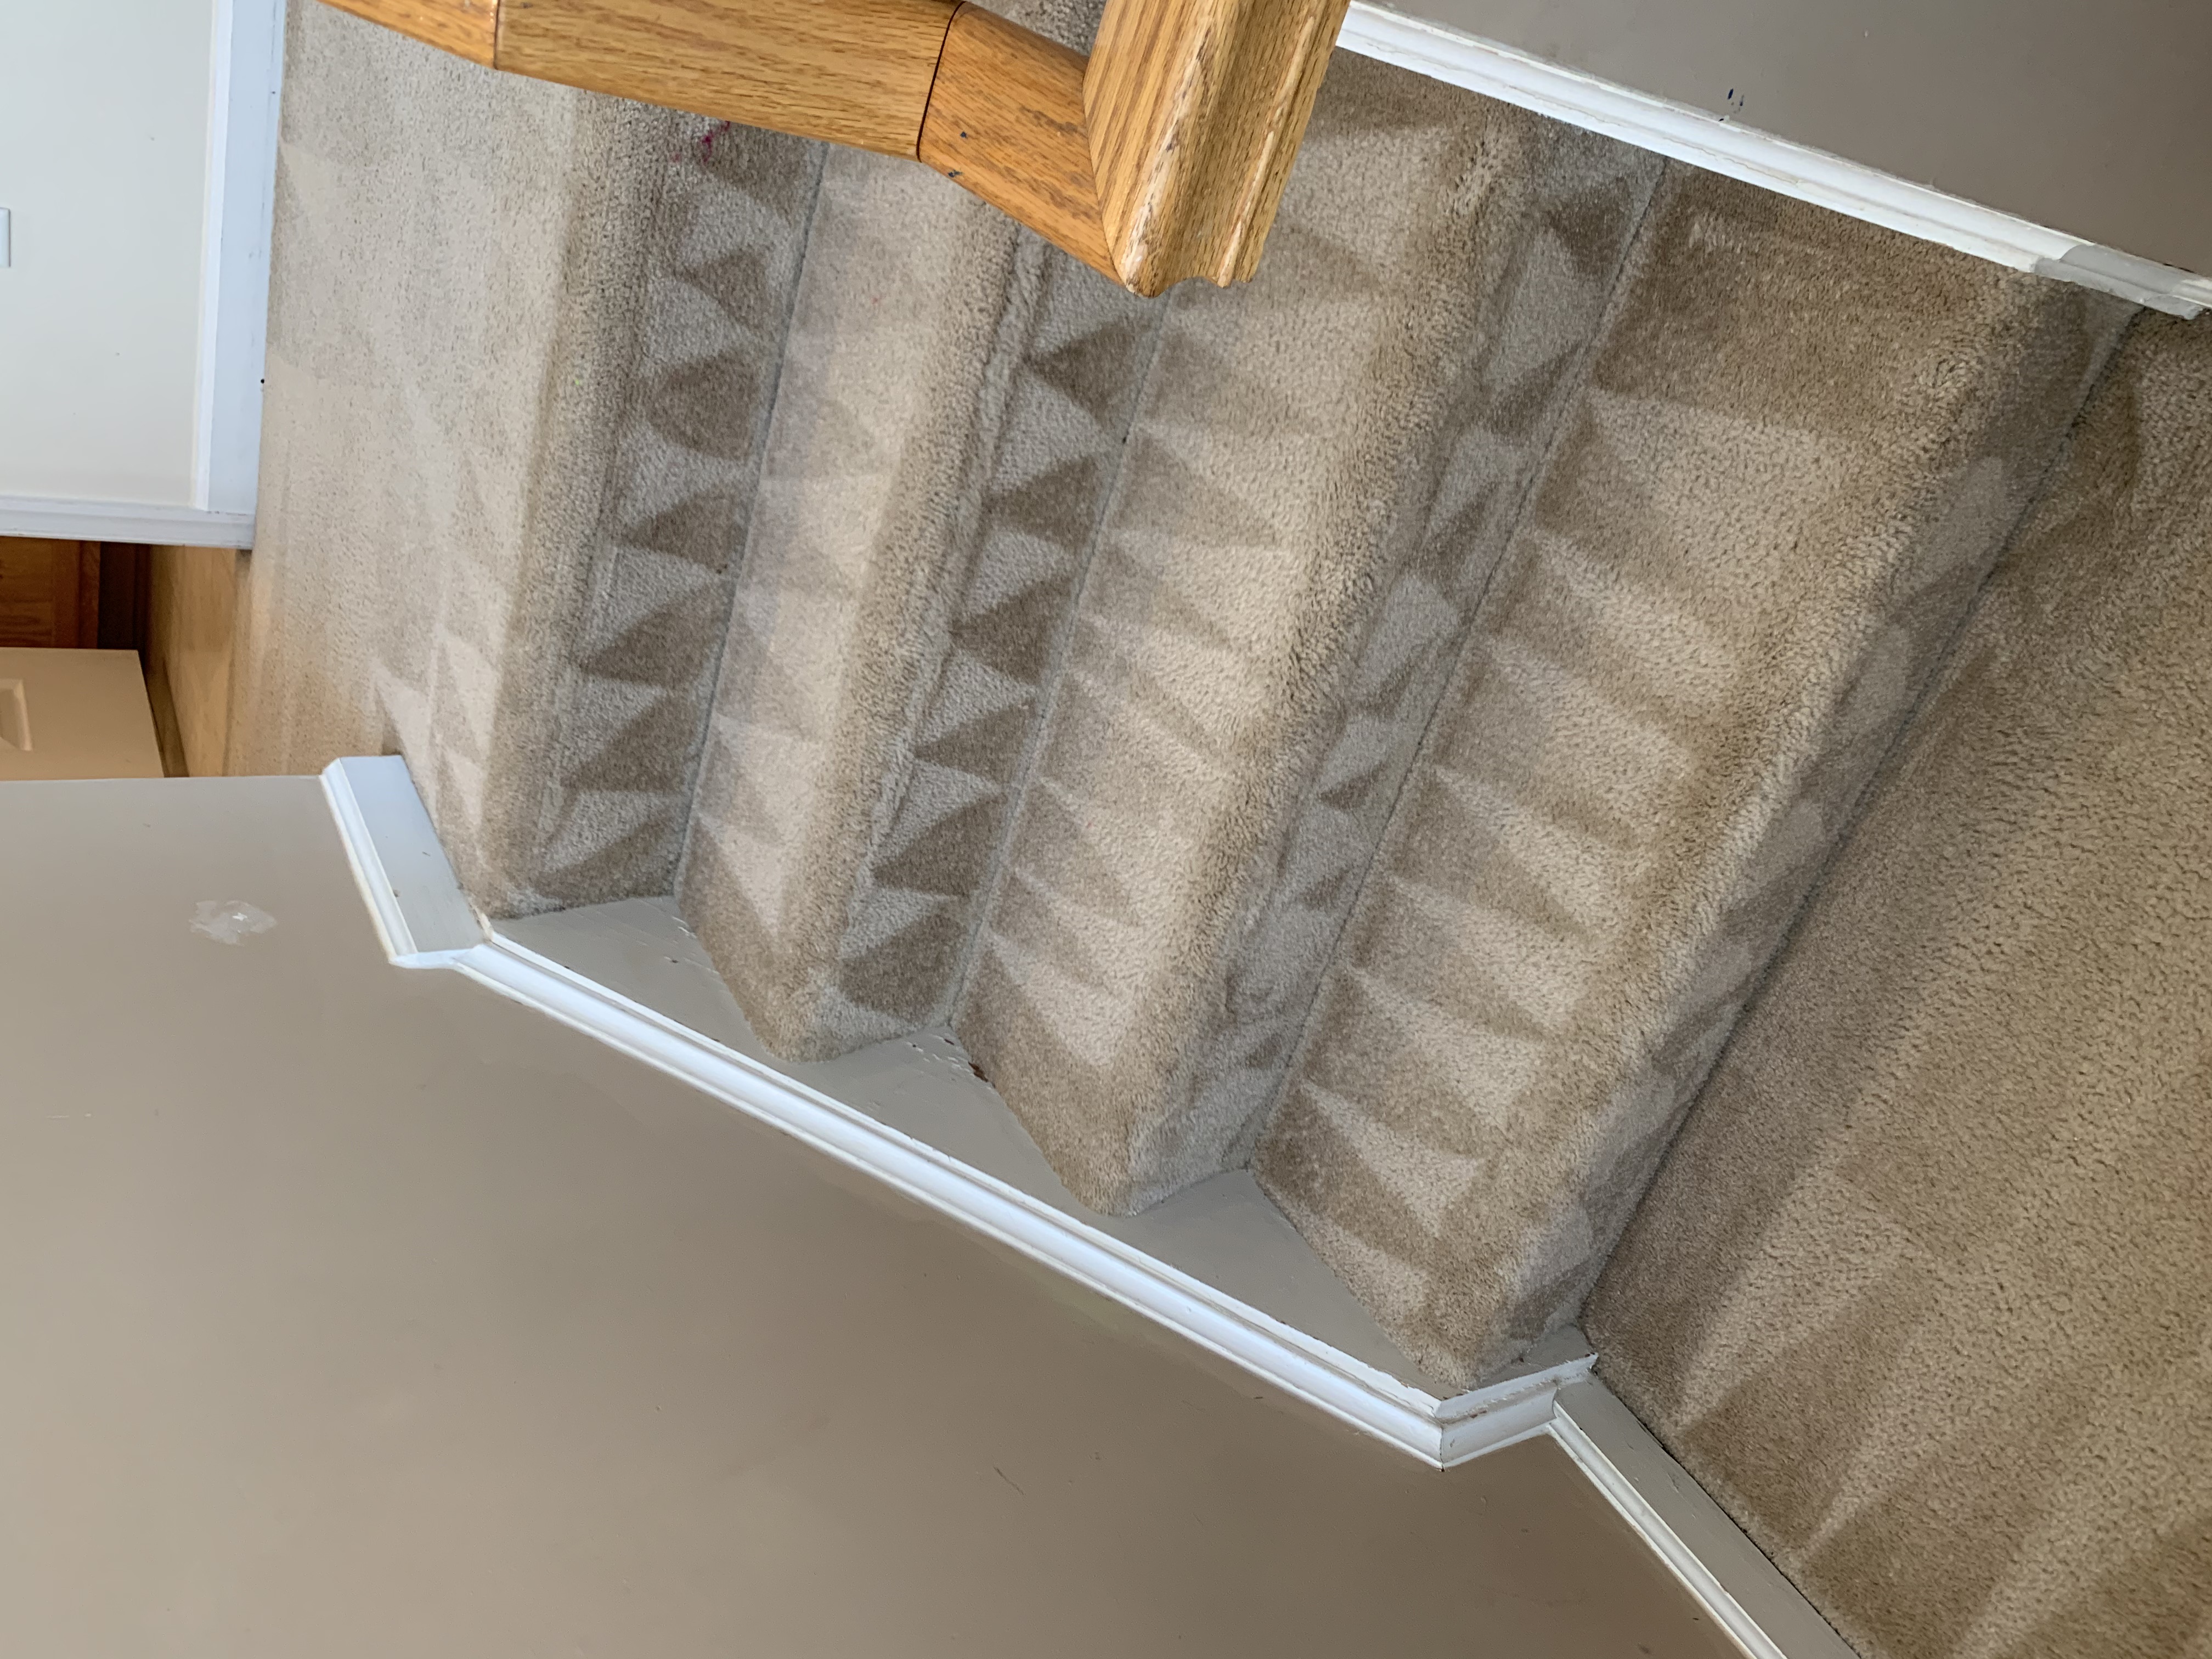 How to Clean Carpeted Stairs 